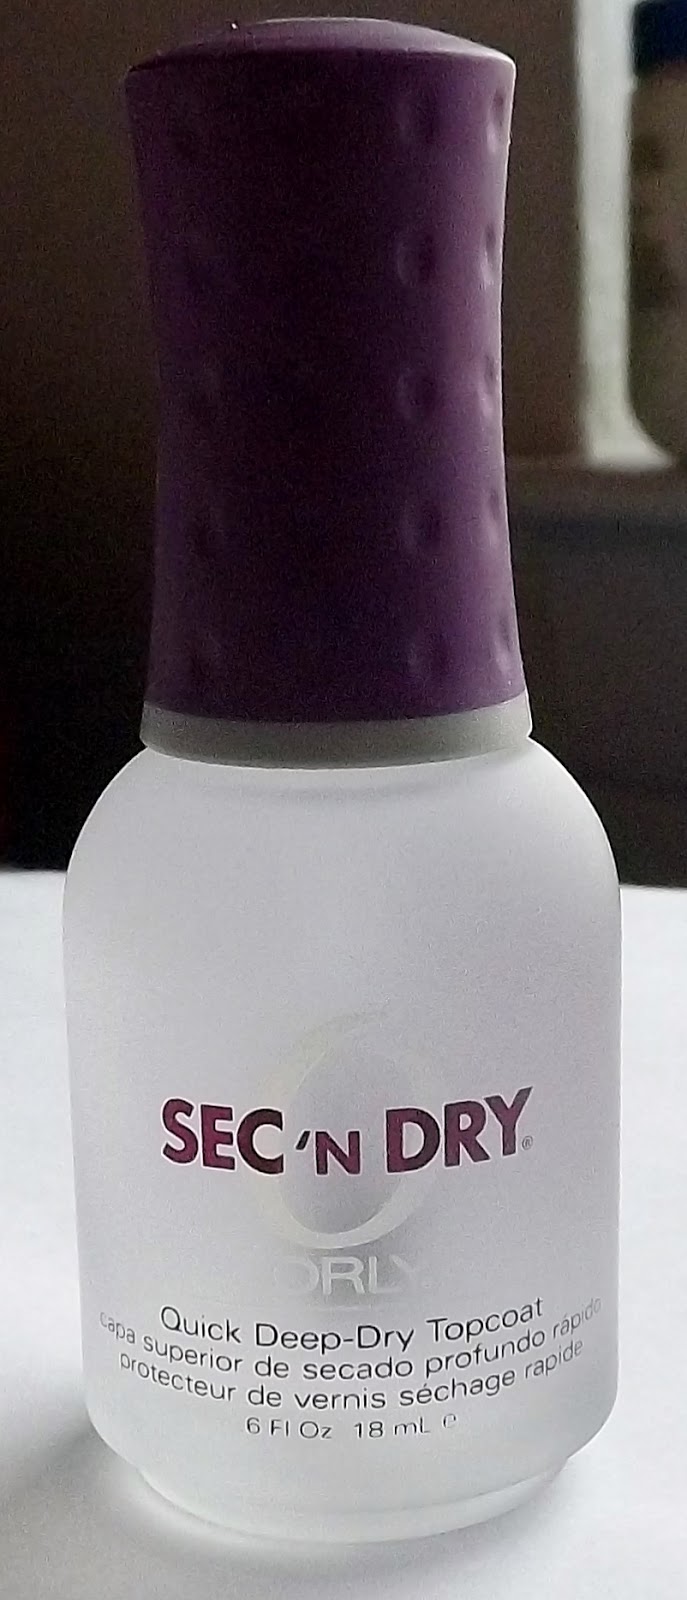 NaeSays: Orly Sec 'N Dry Review